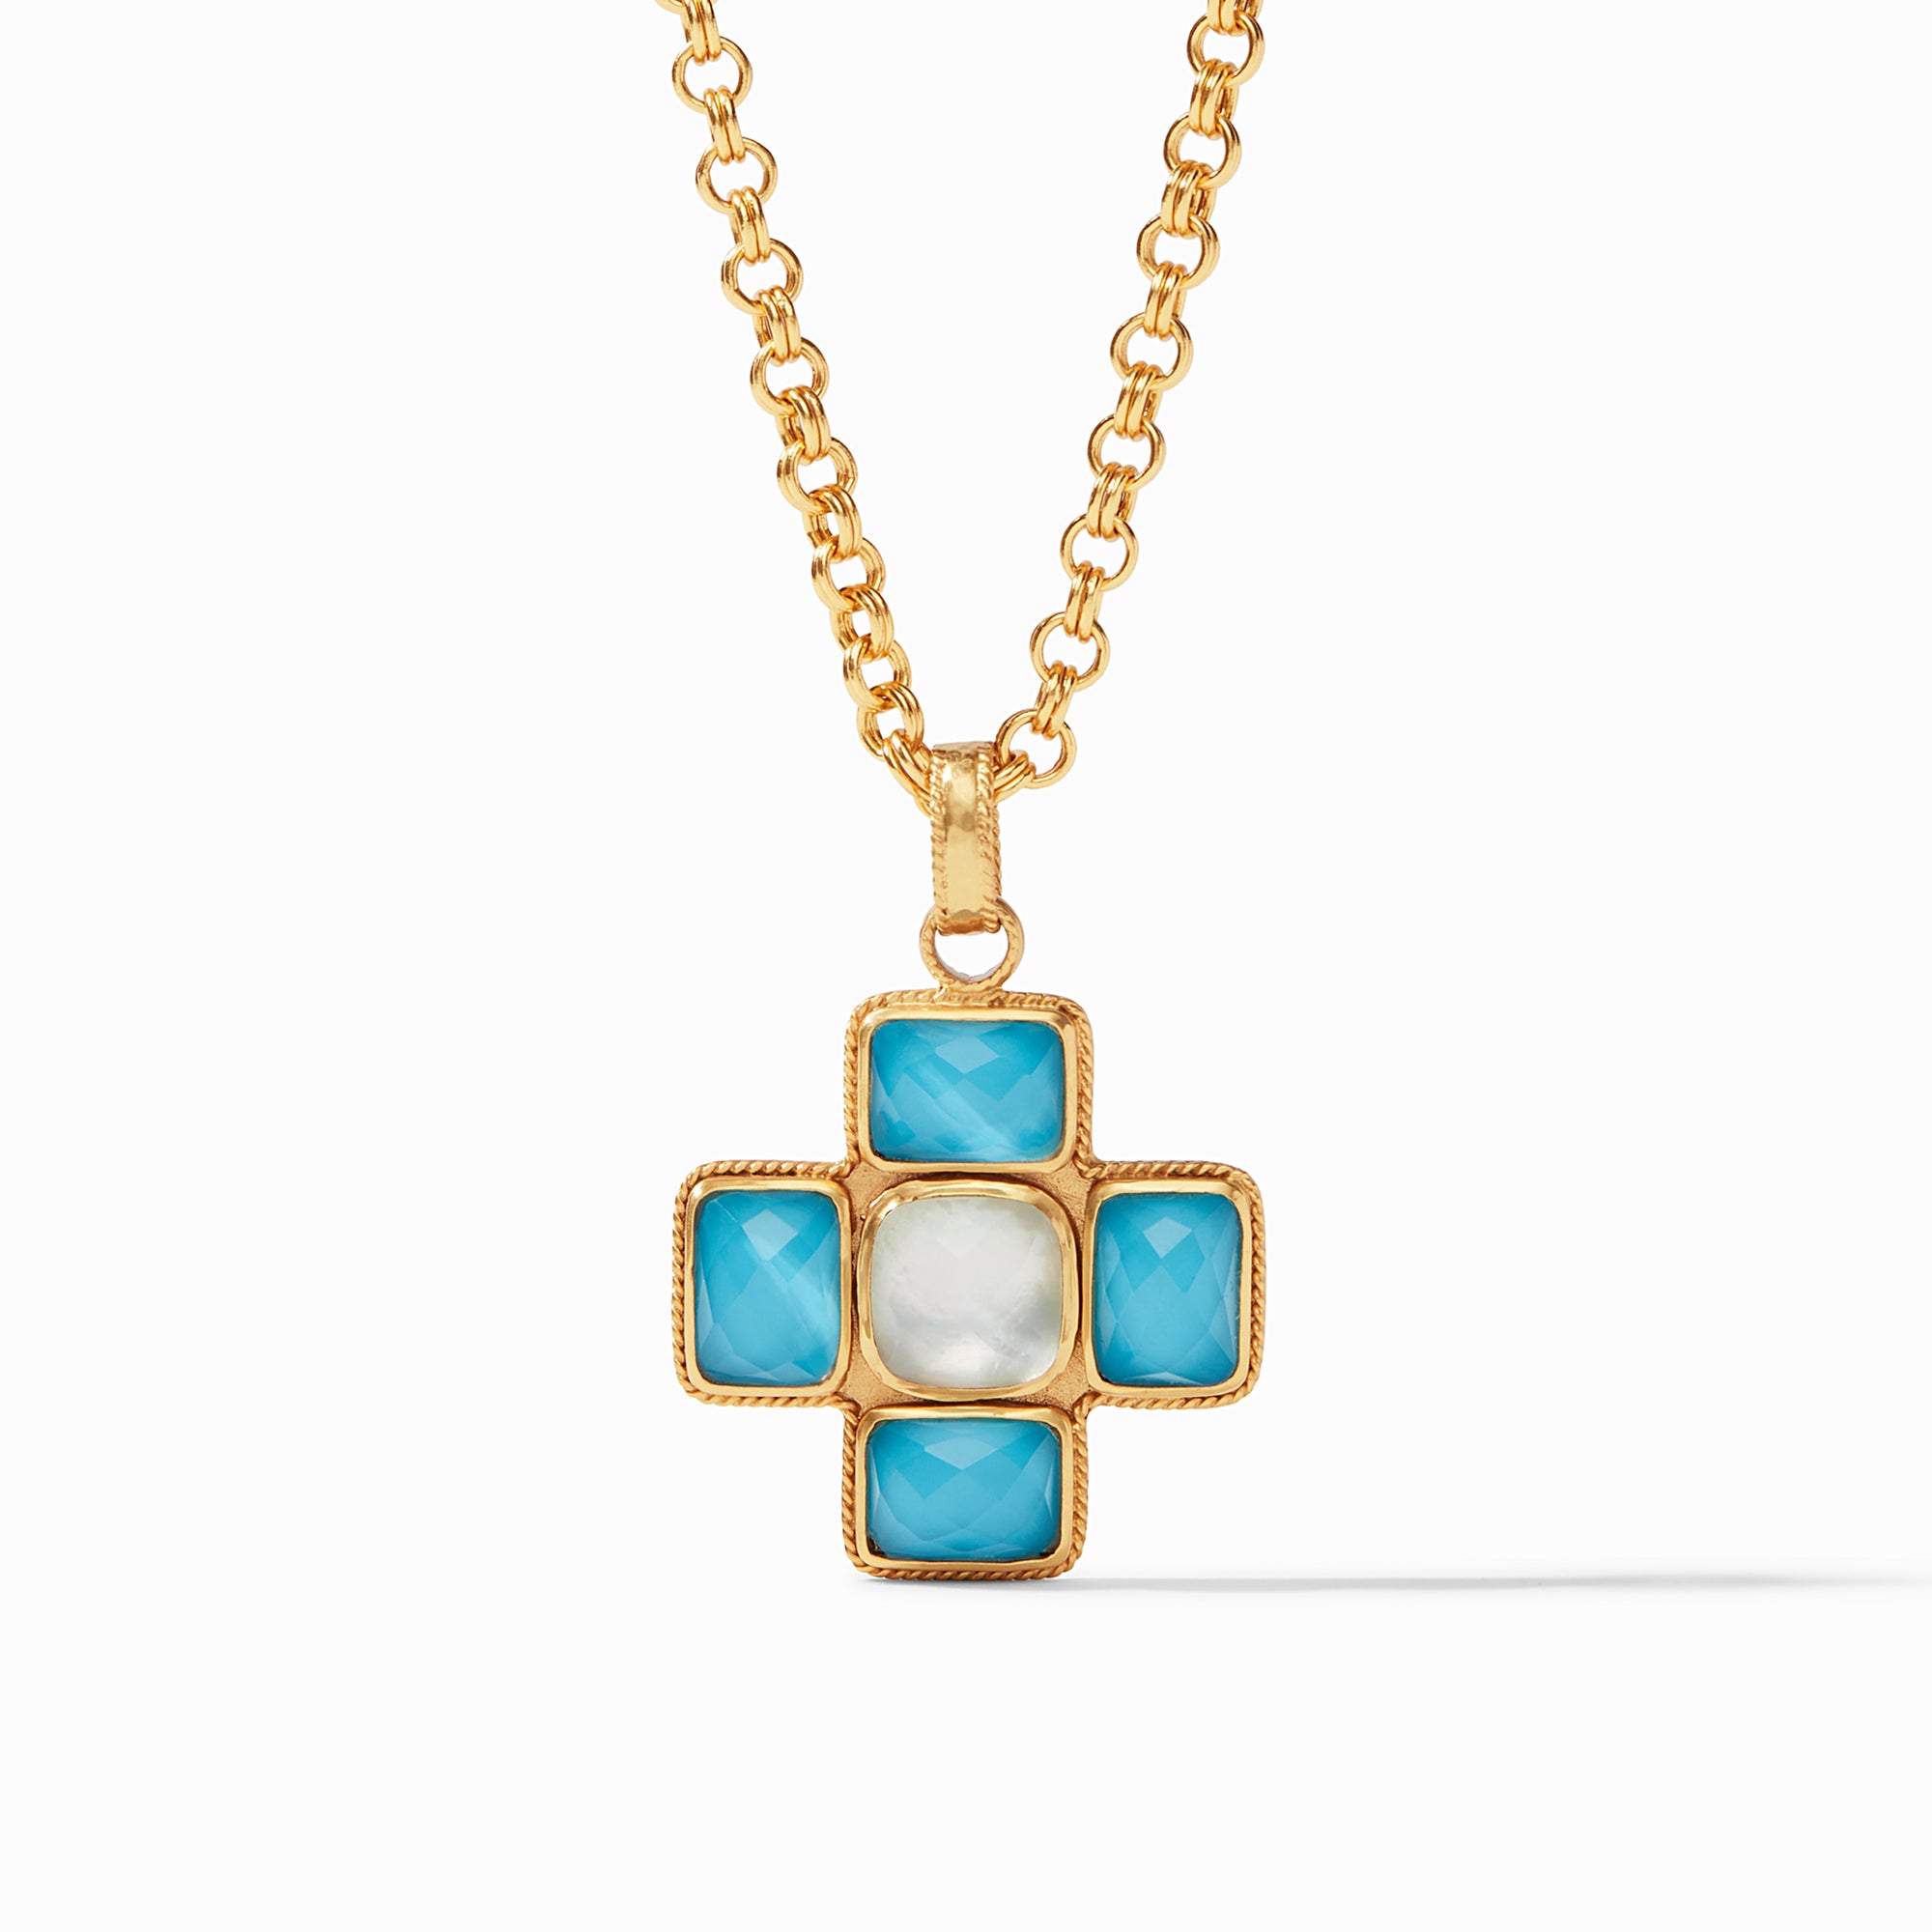 Julie Vos - Savoy Pendant, Iridescent Pacific Blue and Iridescent Clear Crystal